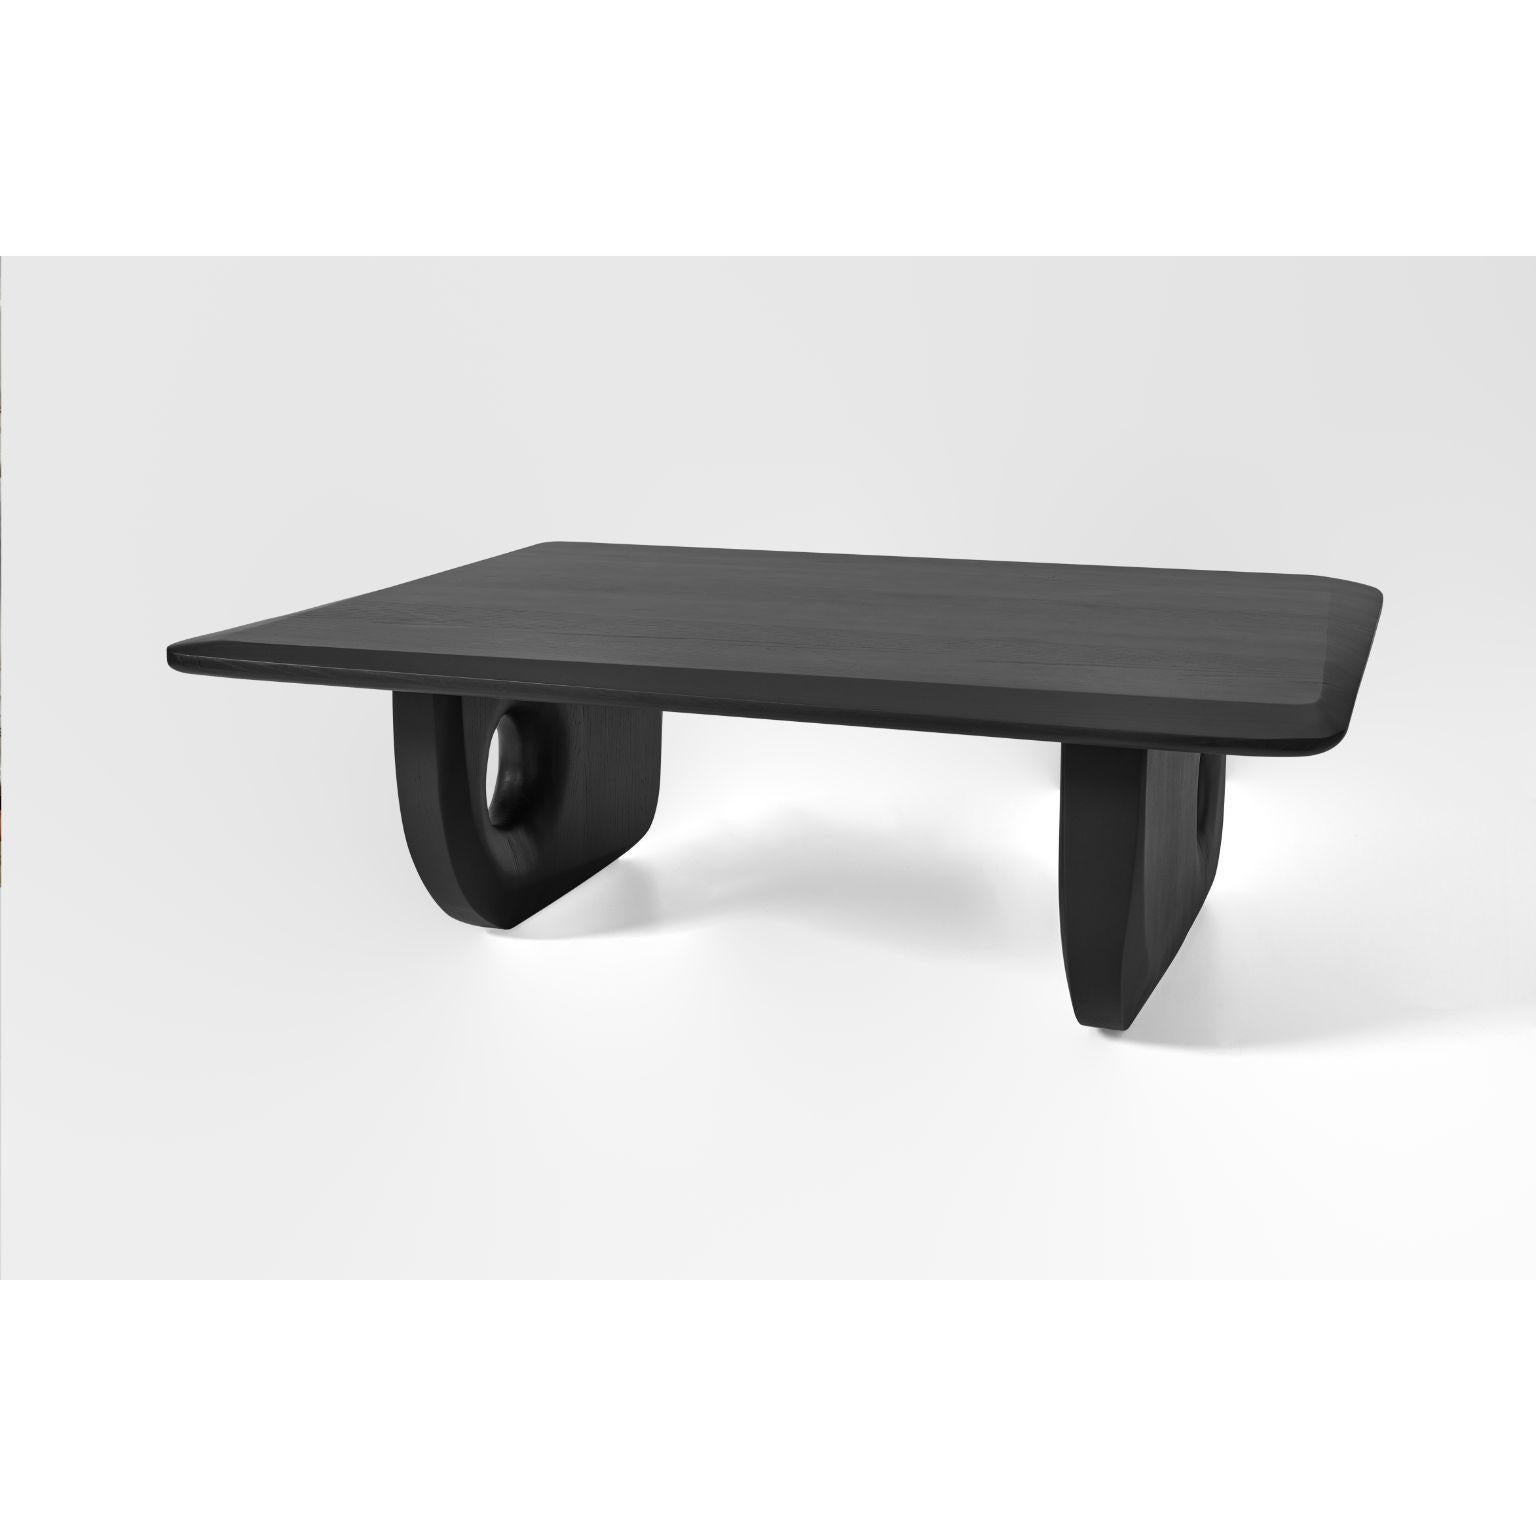 Turkish Zomana Low Table M by Contemporary Ecowood For Sale